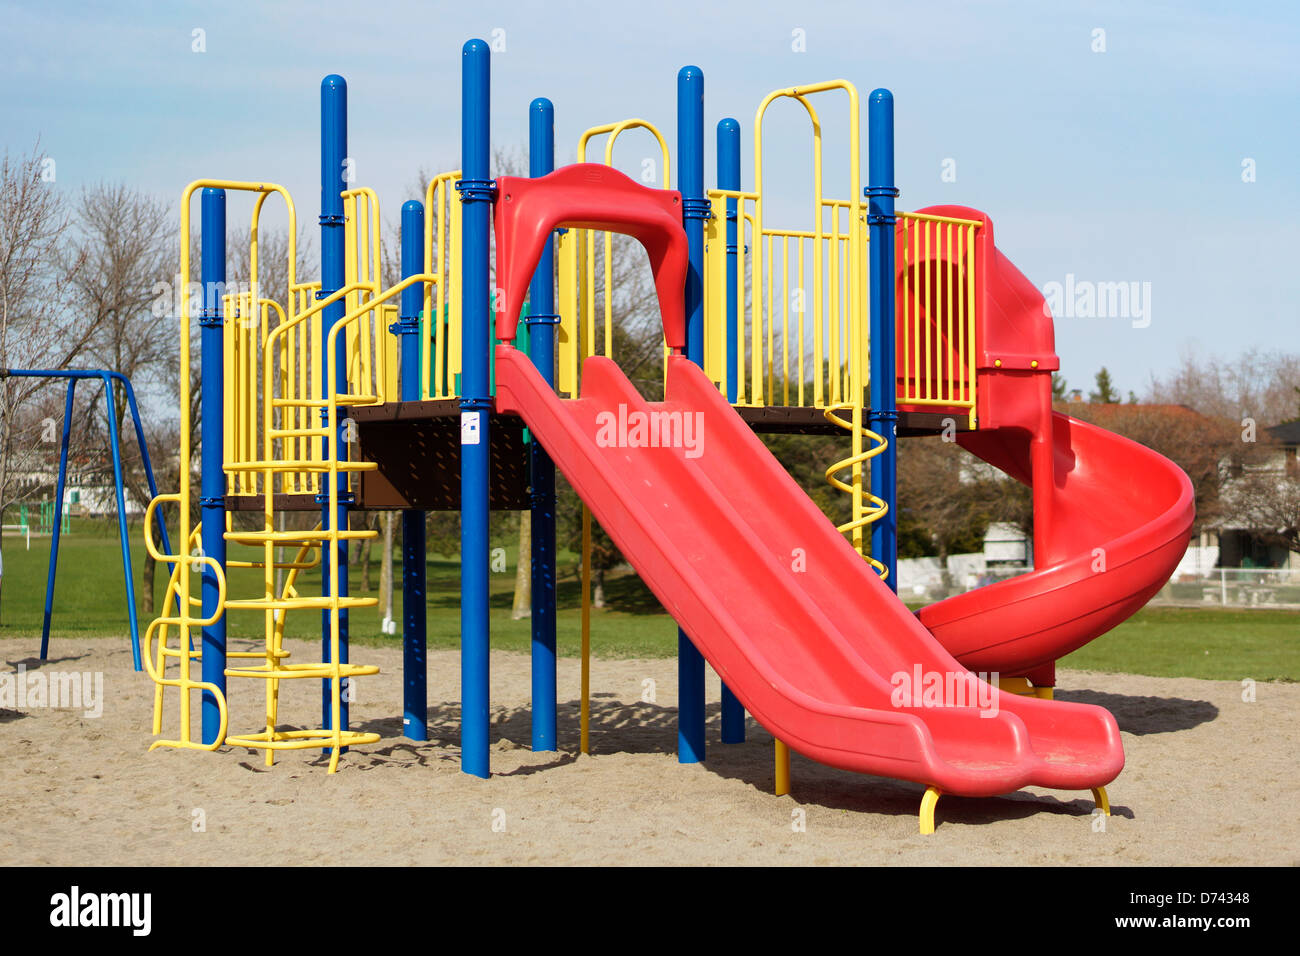 Childrens Playground Slides School Grounds Outdoors D74348 